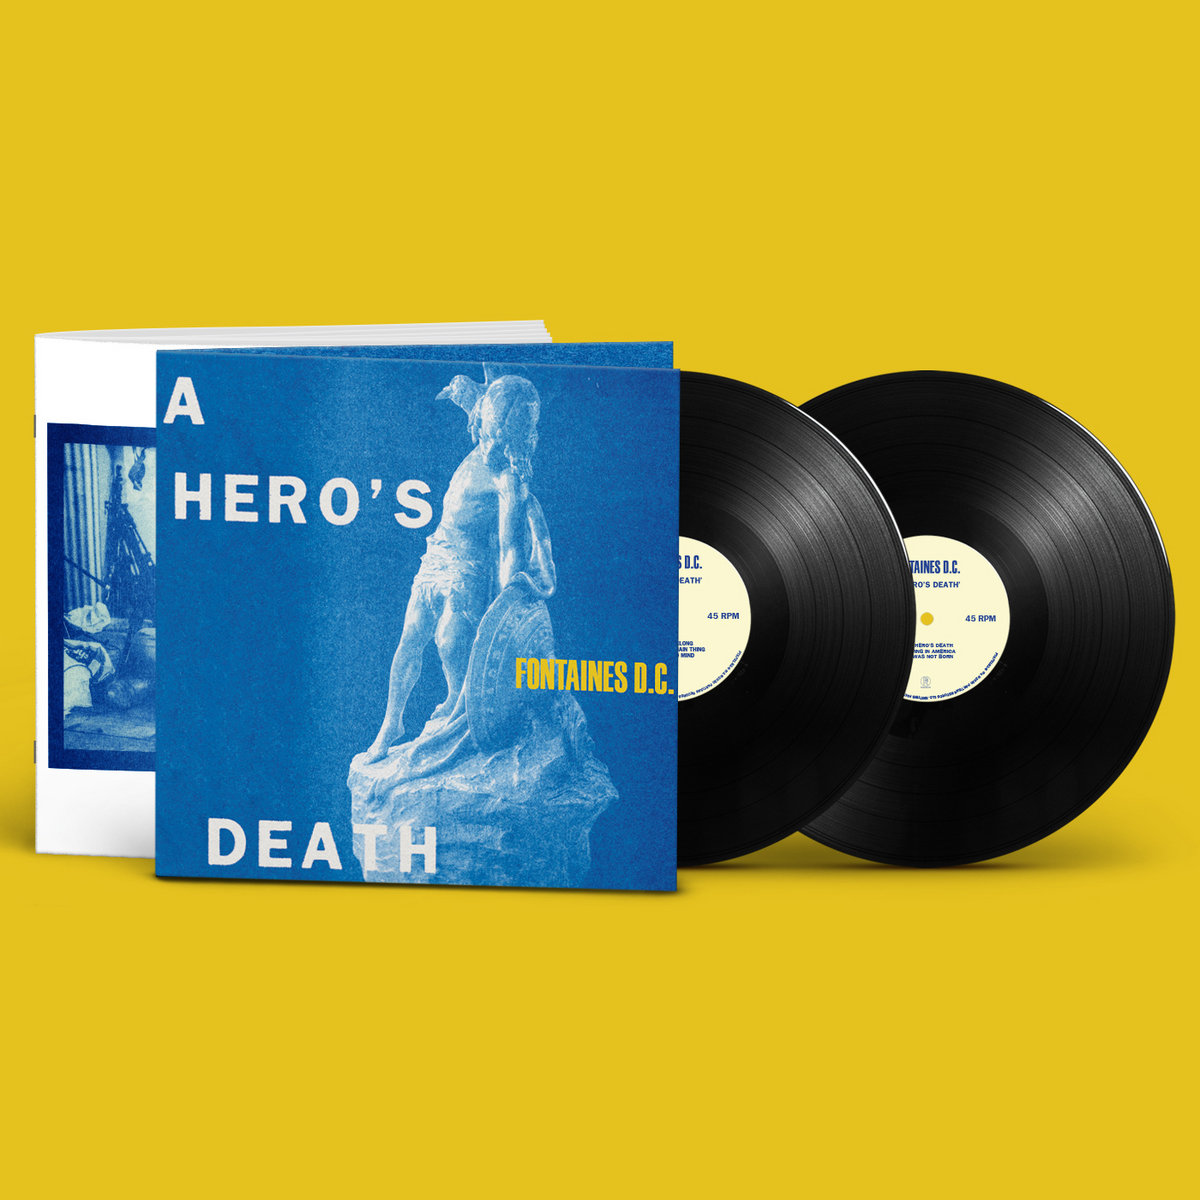 Fontaines D.C. "A hero's Death" Deluxe 2LP